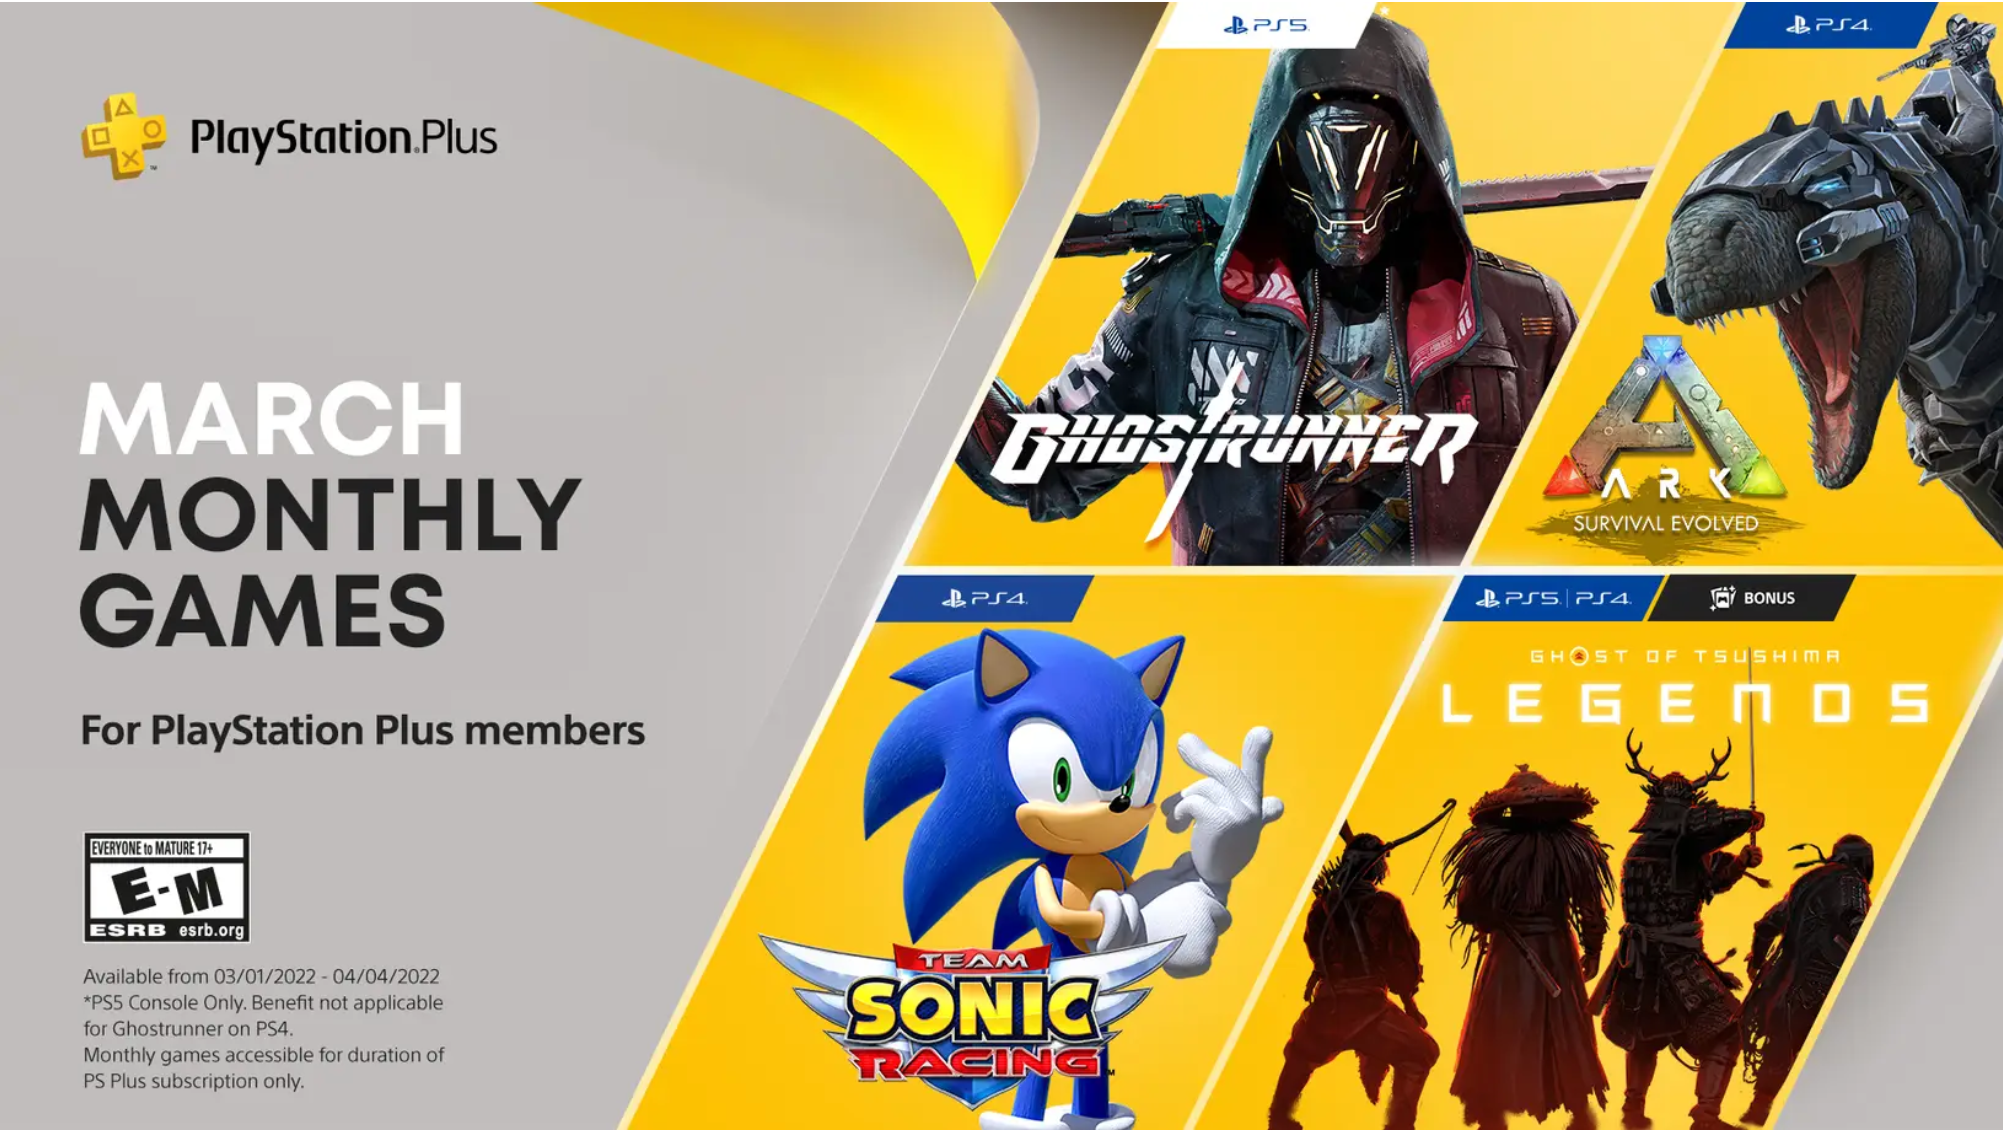 PlayStation Plus games March